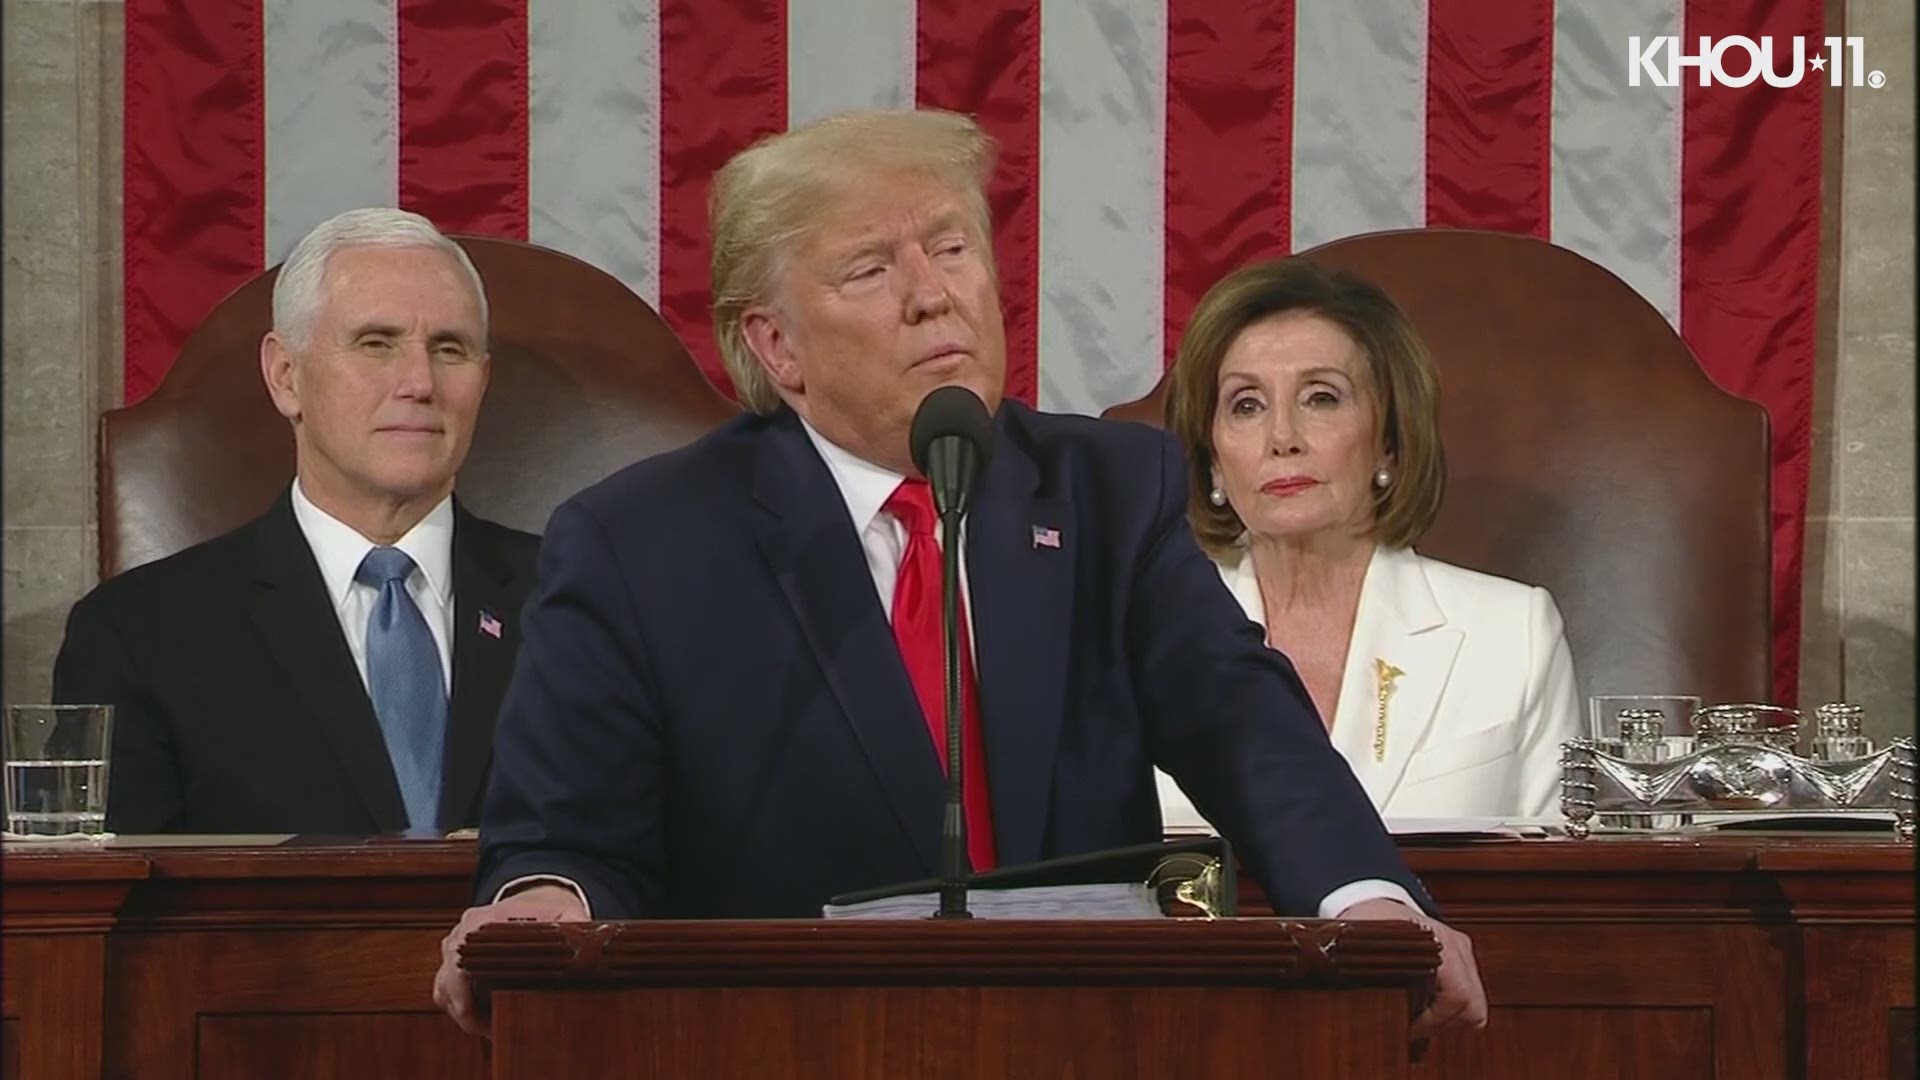 When President Donald Trump finished his State of the Union address on Tuesday night, House Speaker Nancy Pelosi ripped her copy of the speech.